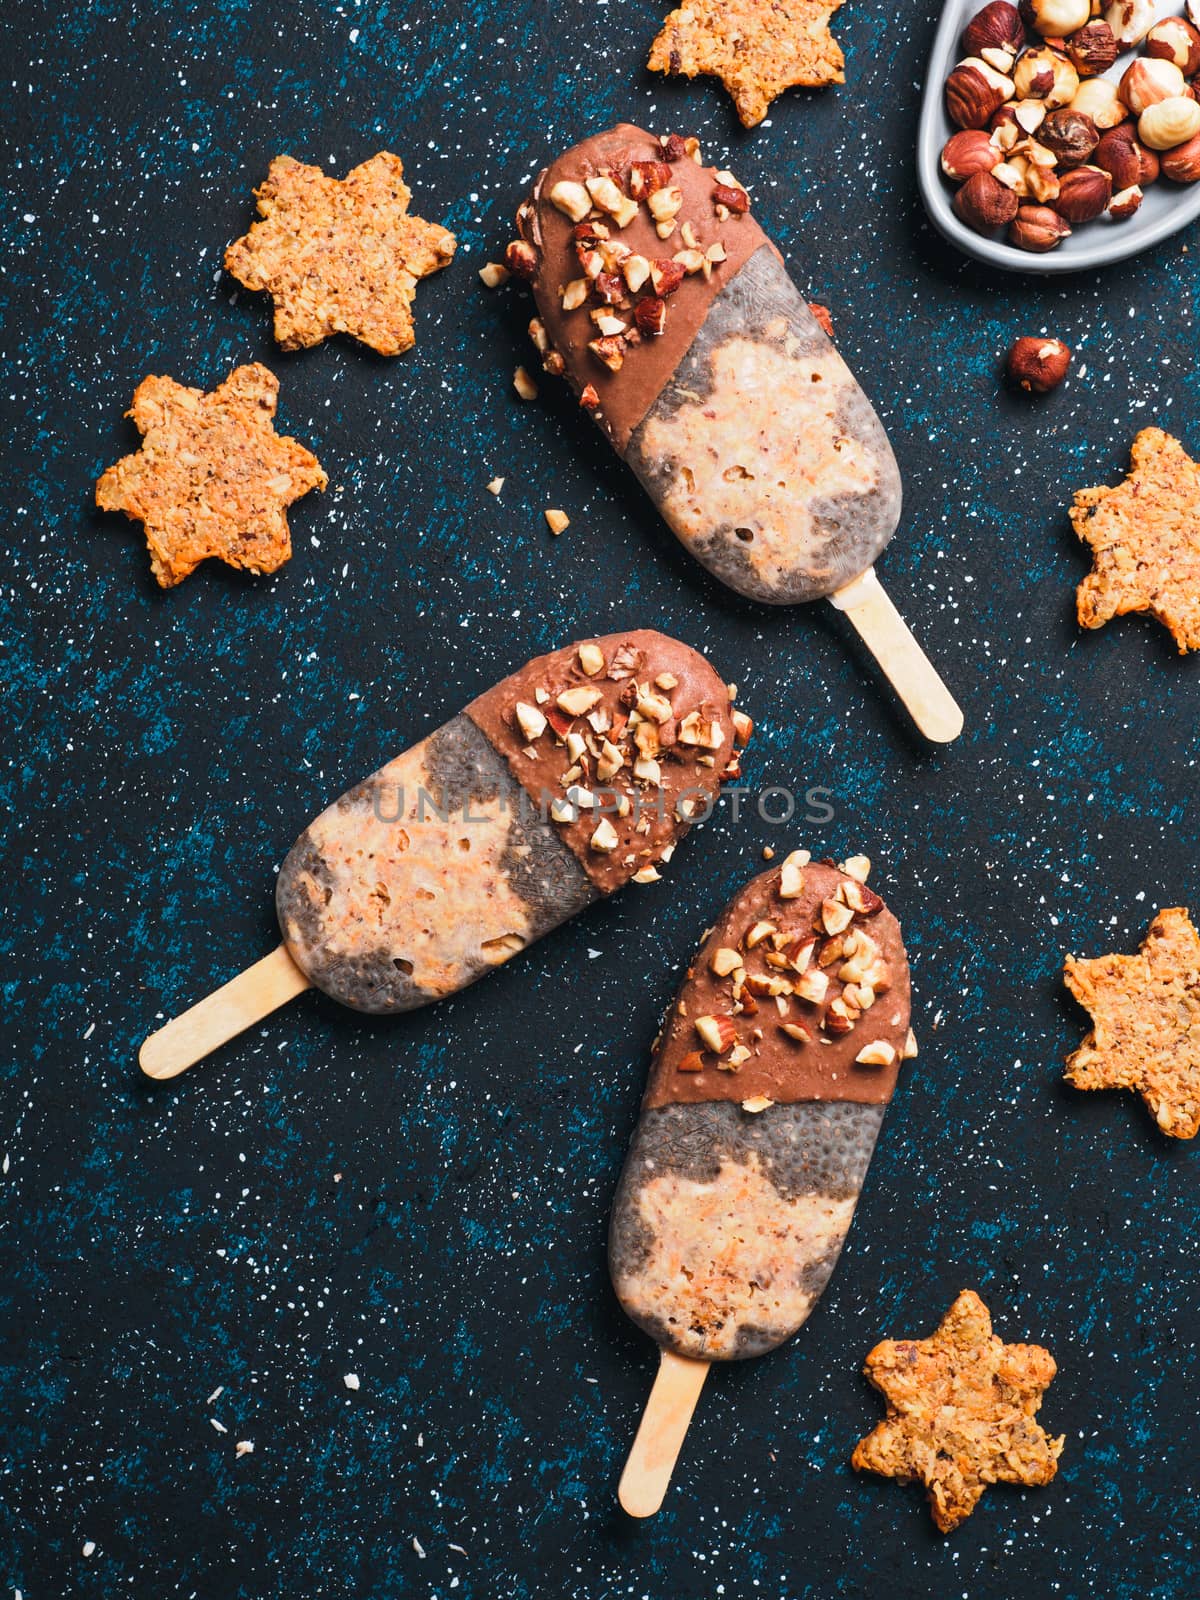 Chia popsicle with raw carrot cake and chocolate on dark blue background. Healthy recipe and idea homemade vegan popsicle ice cream. Easter dessert idea. Top view or flat-lay. Copy space for text.